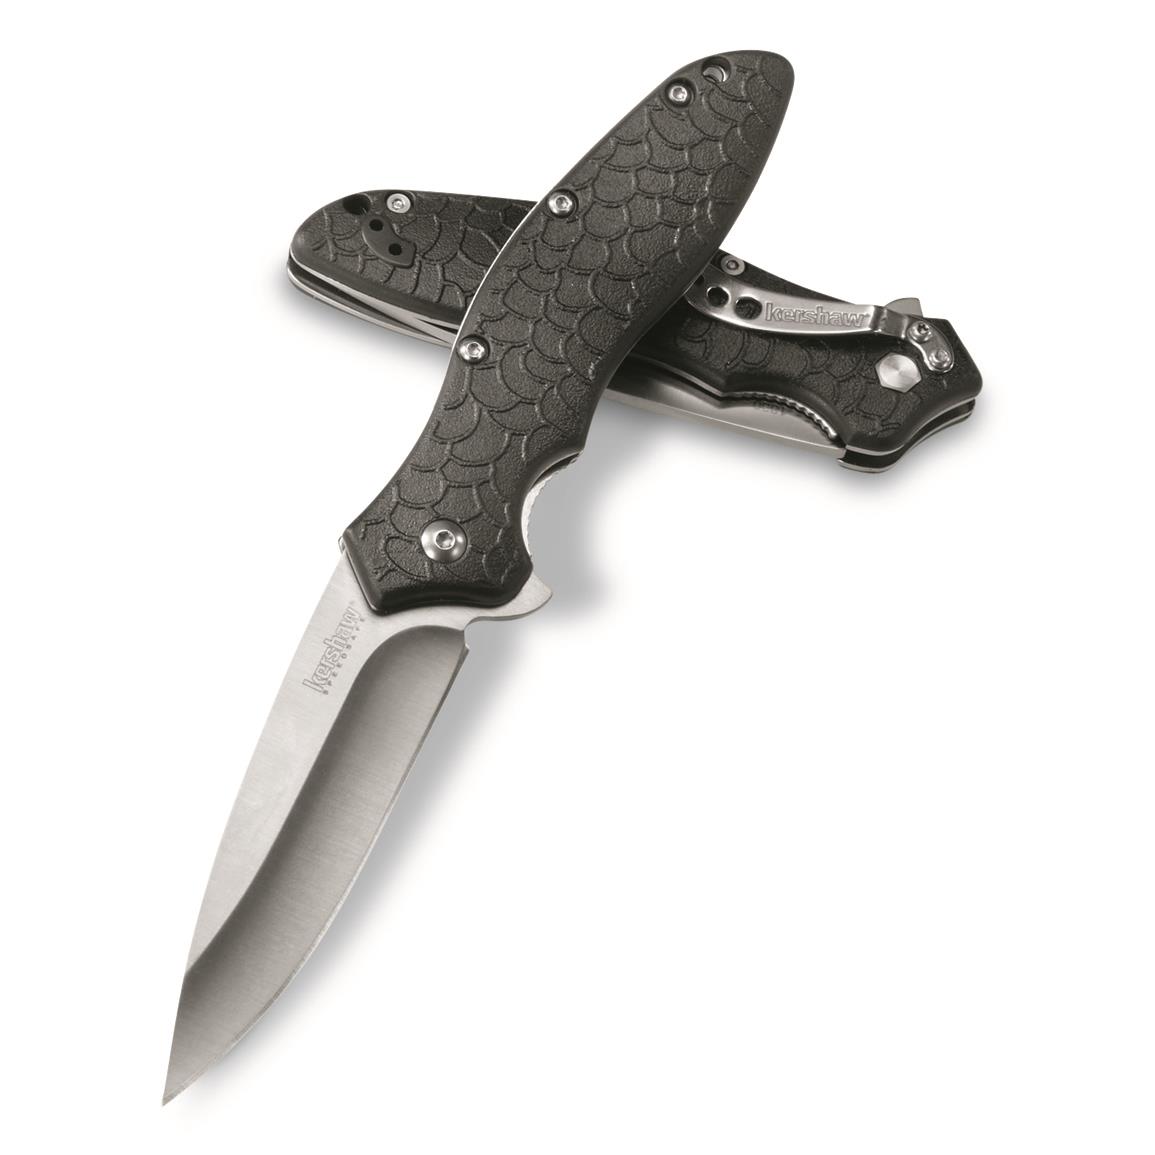 Kershaw OSO Sweet 1830 Spring-Assisted Knife, 3" Blade